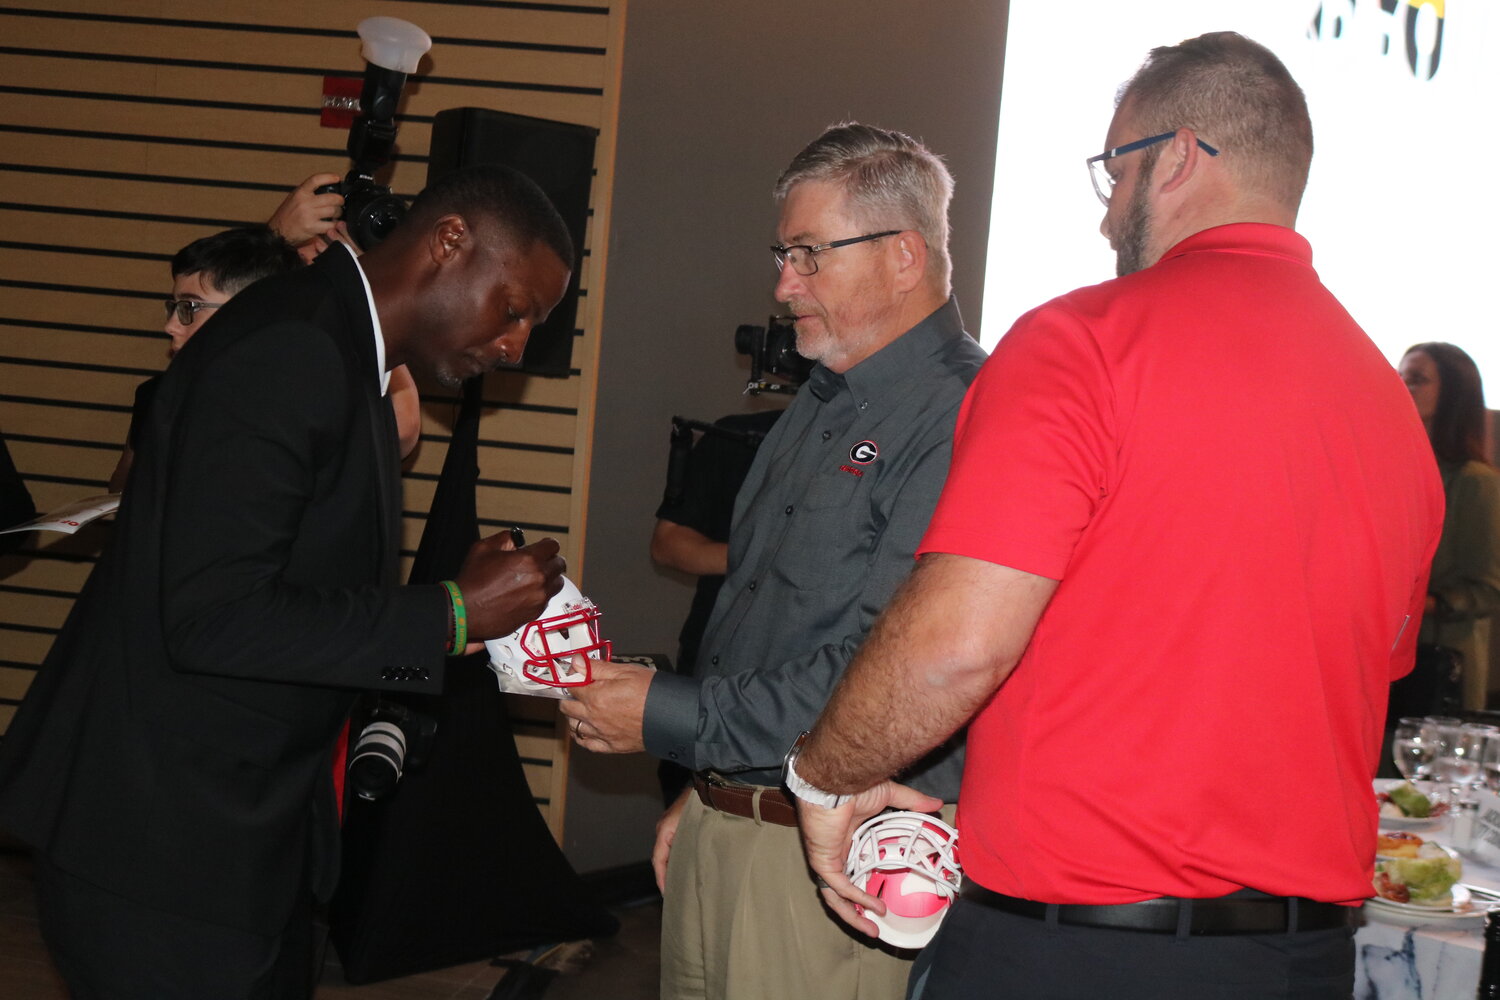 Terrence Edwards signs autographs for Georgia fans.